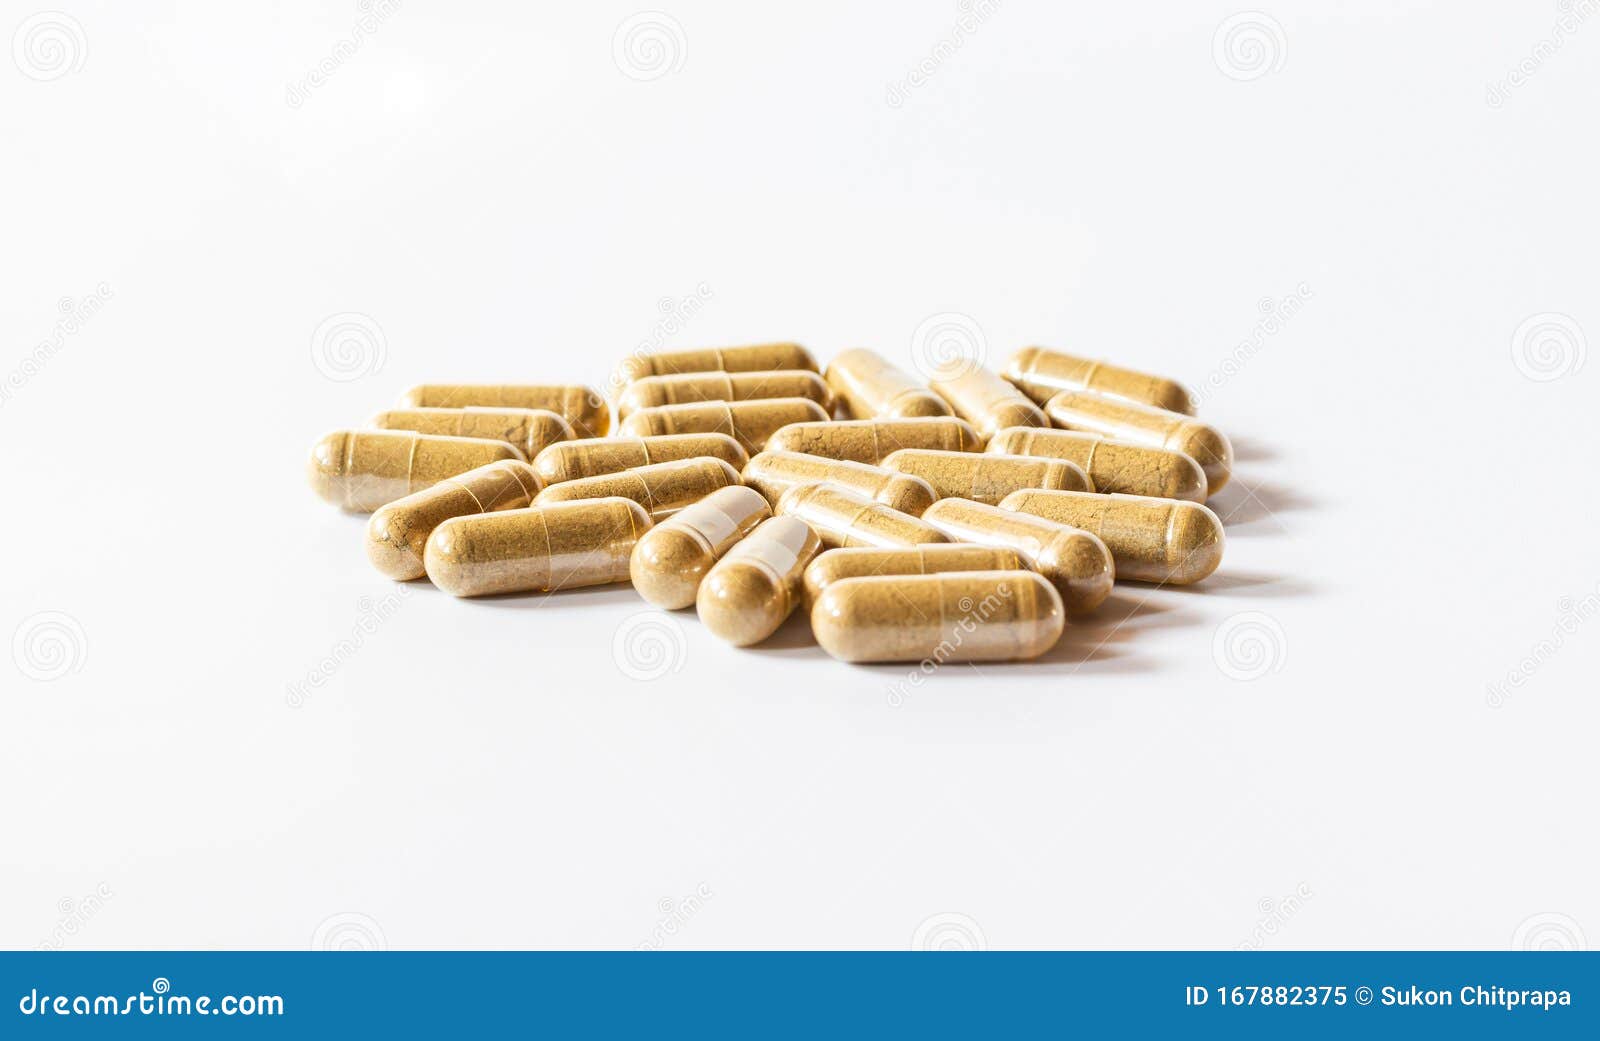 brown herbal capsules on a white background